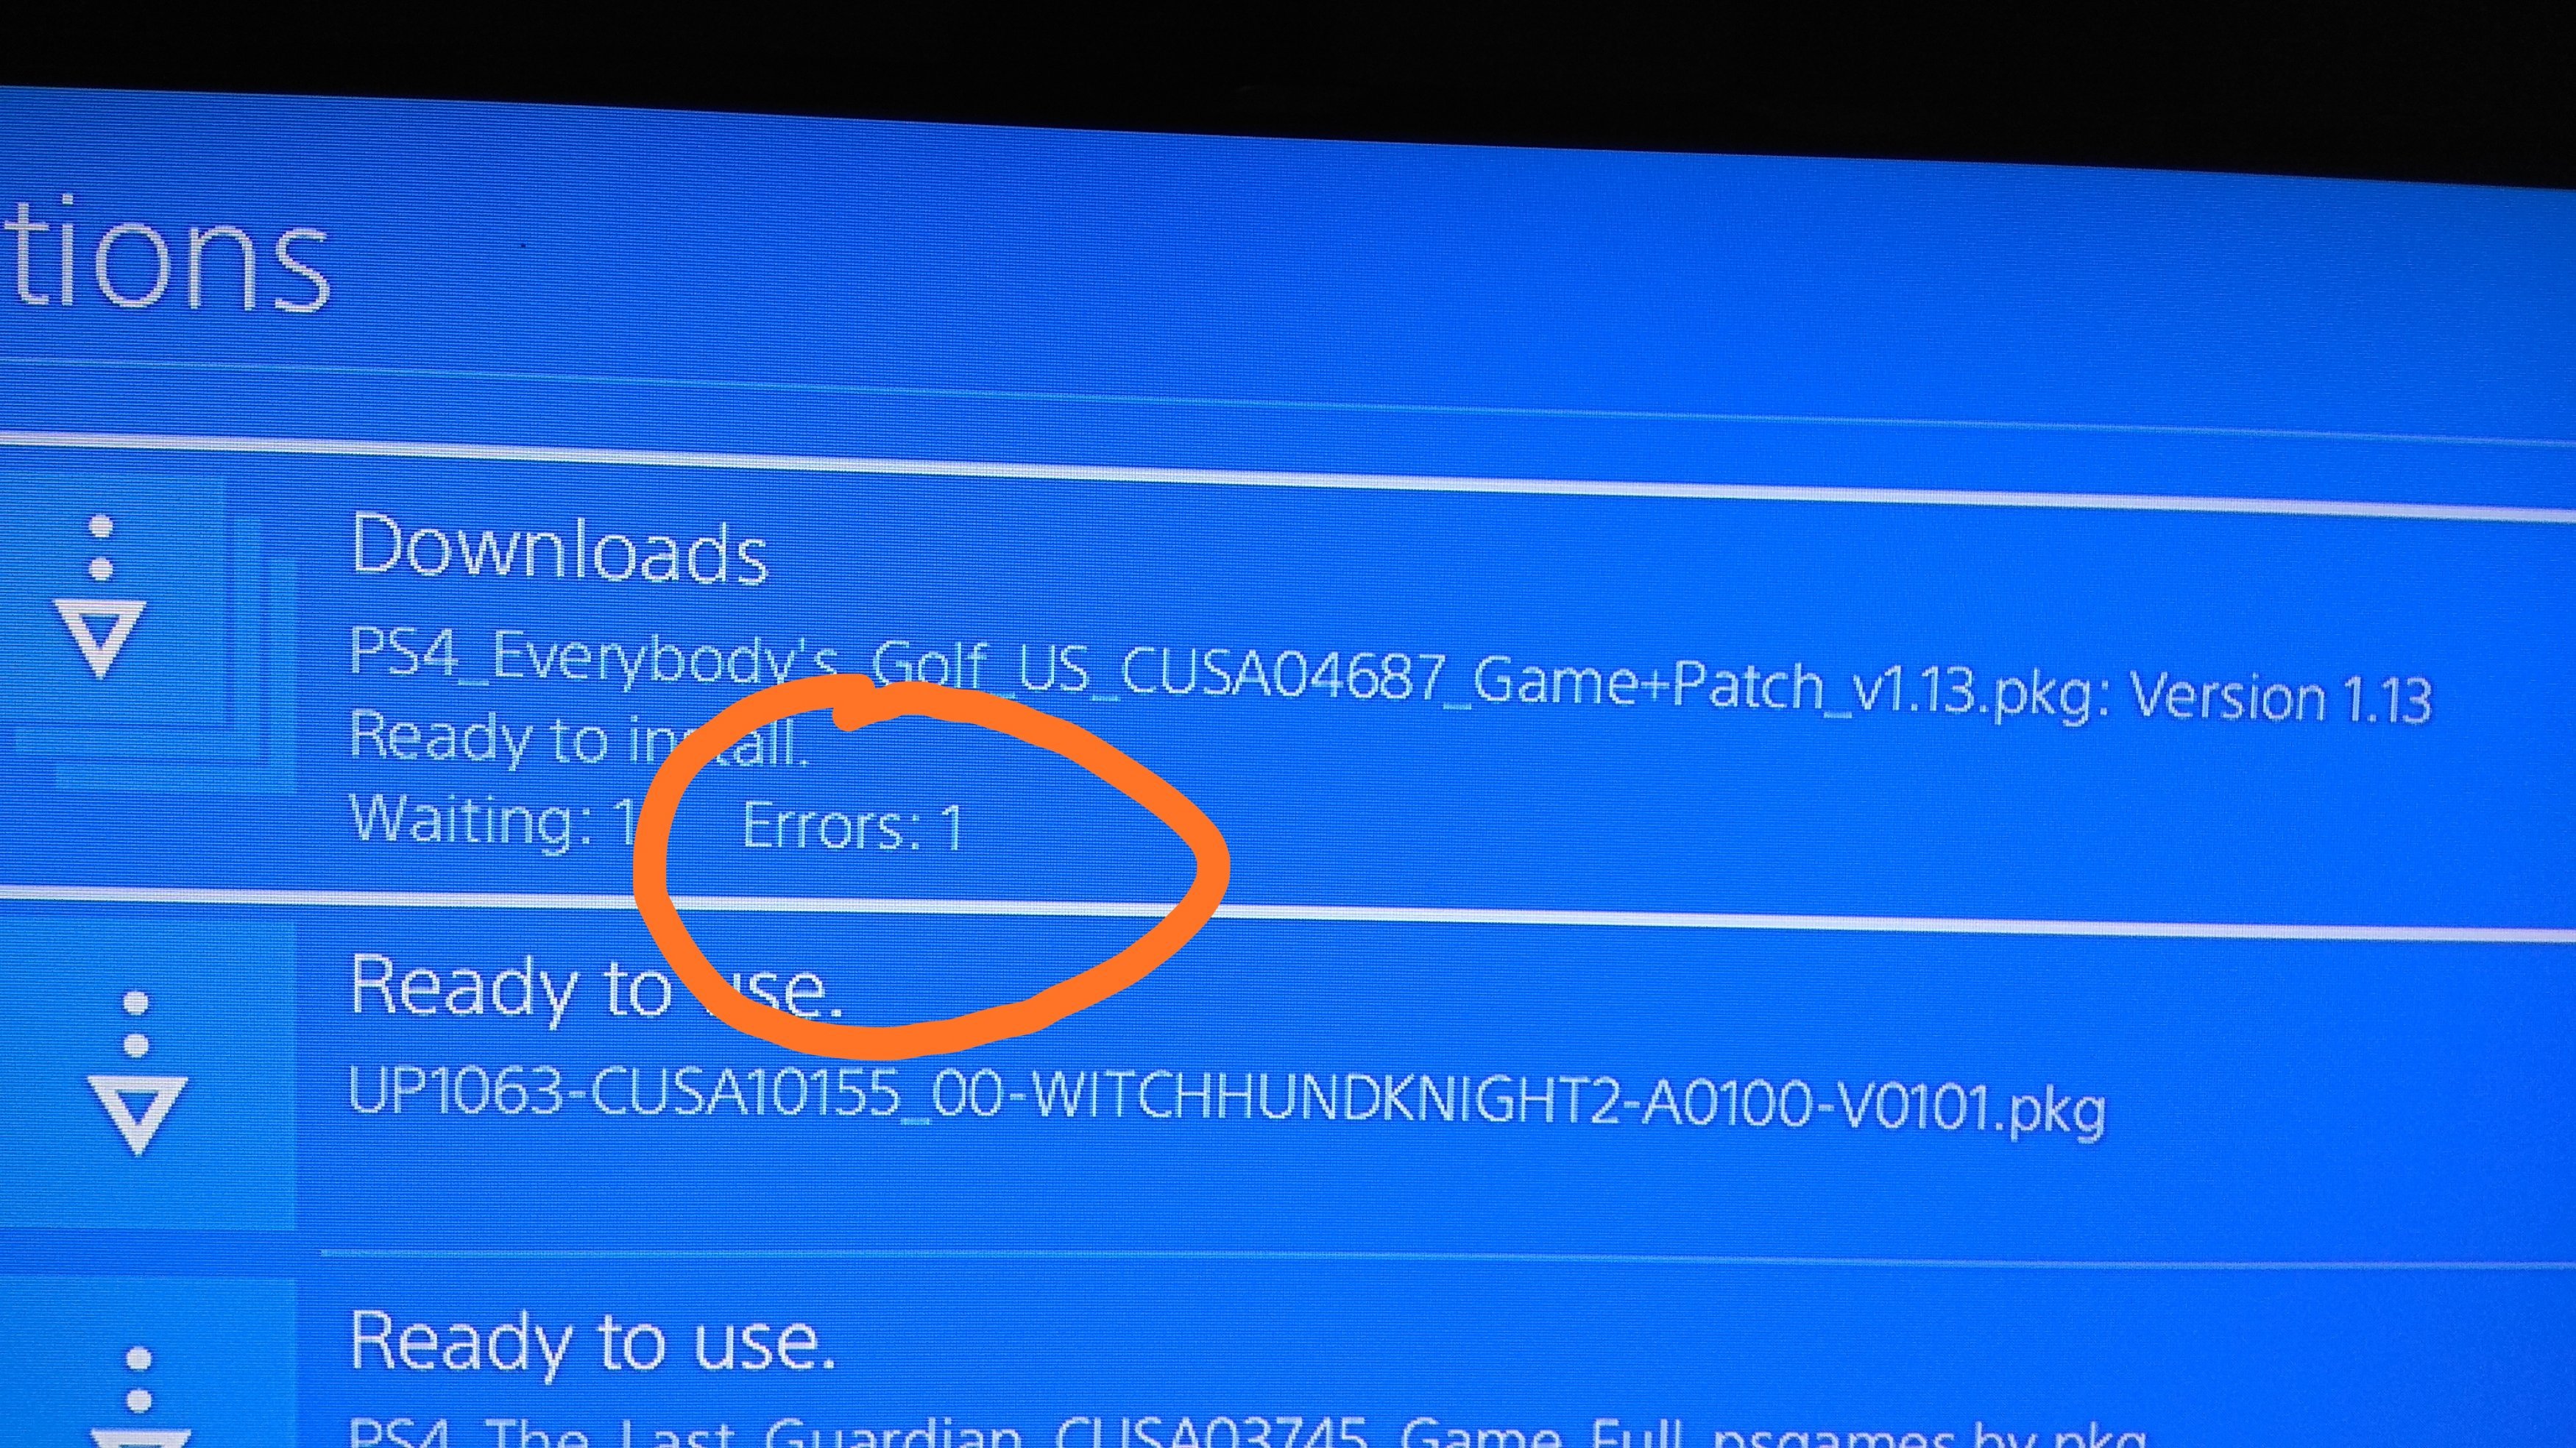 i installed bad fpkg on ps4 hen, shows as others application, how to clean  / remove / delete it ? | GBAtemp.net - The Independent Video Game Community